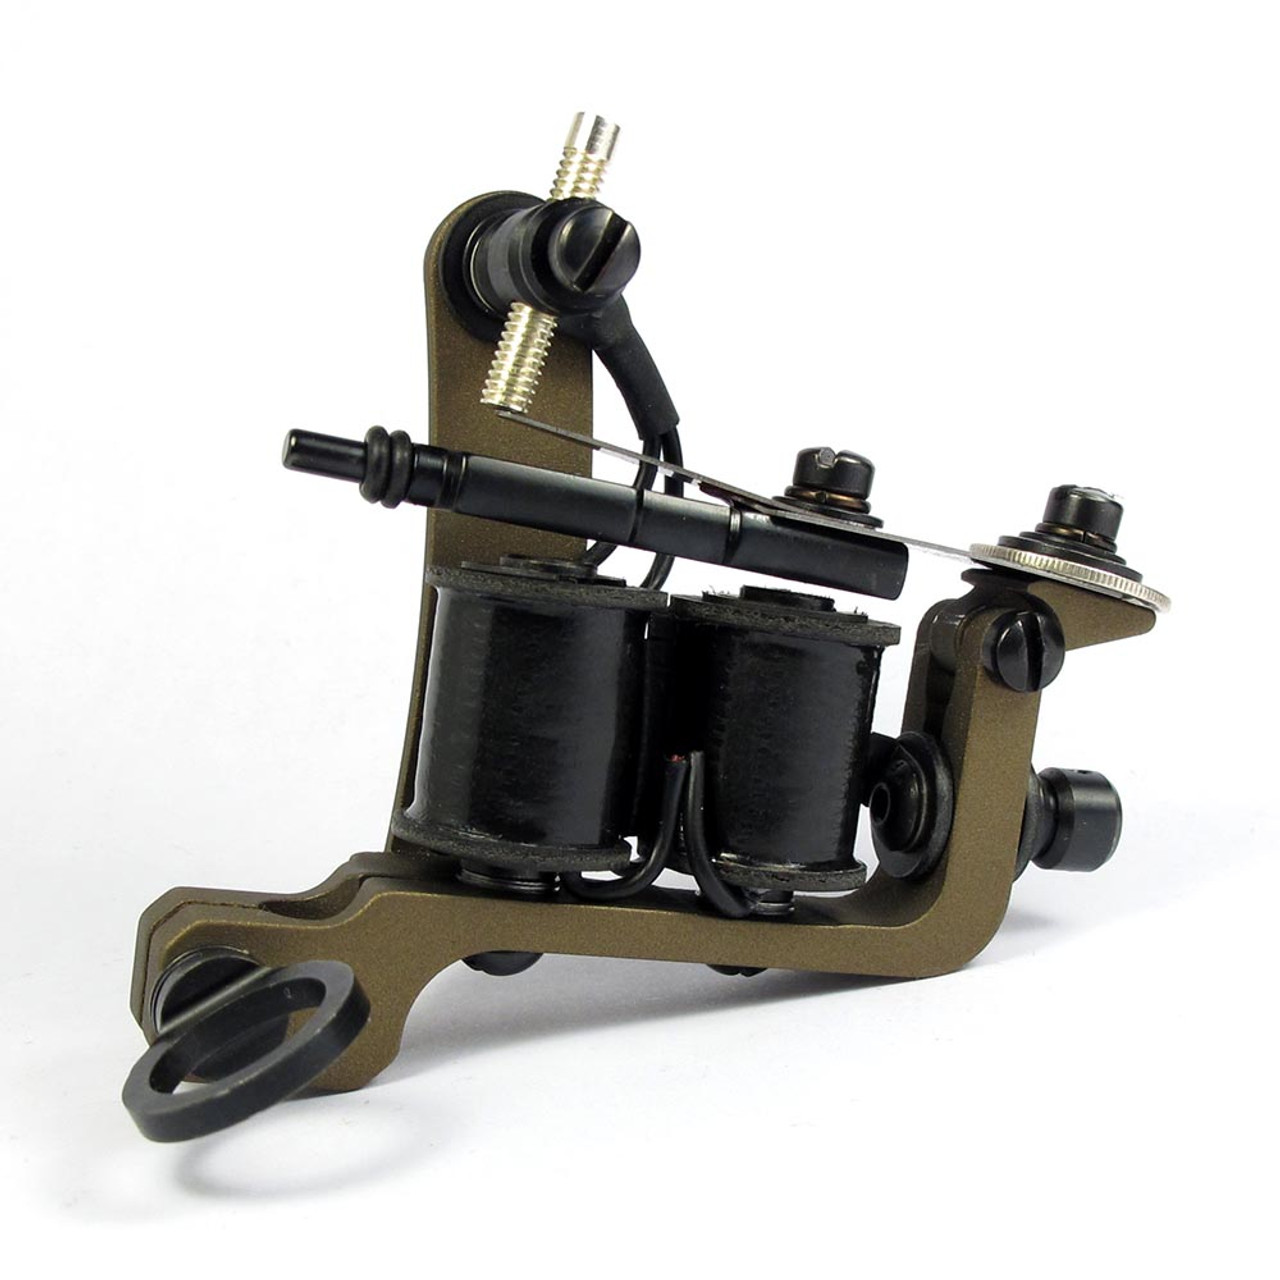 How to Tune or setup of a tattoo machine for lining  shading  Tattoo   WonderHowTo